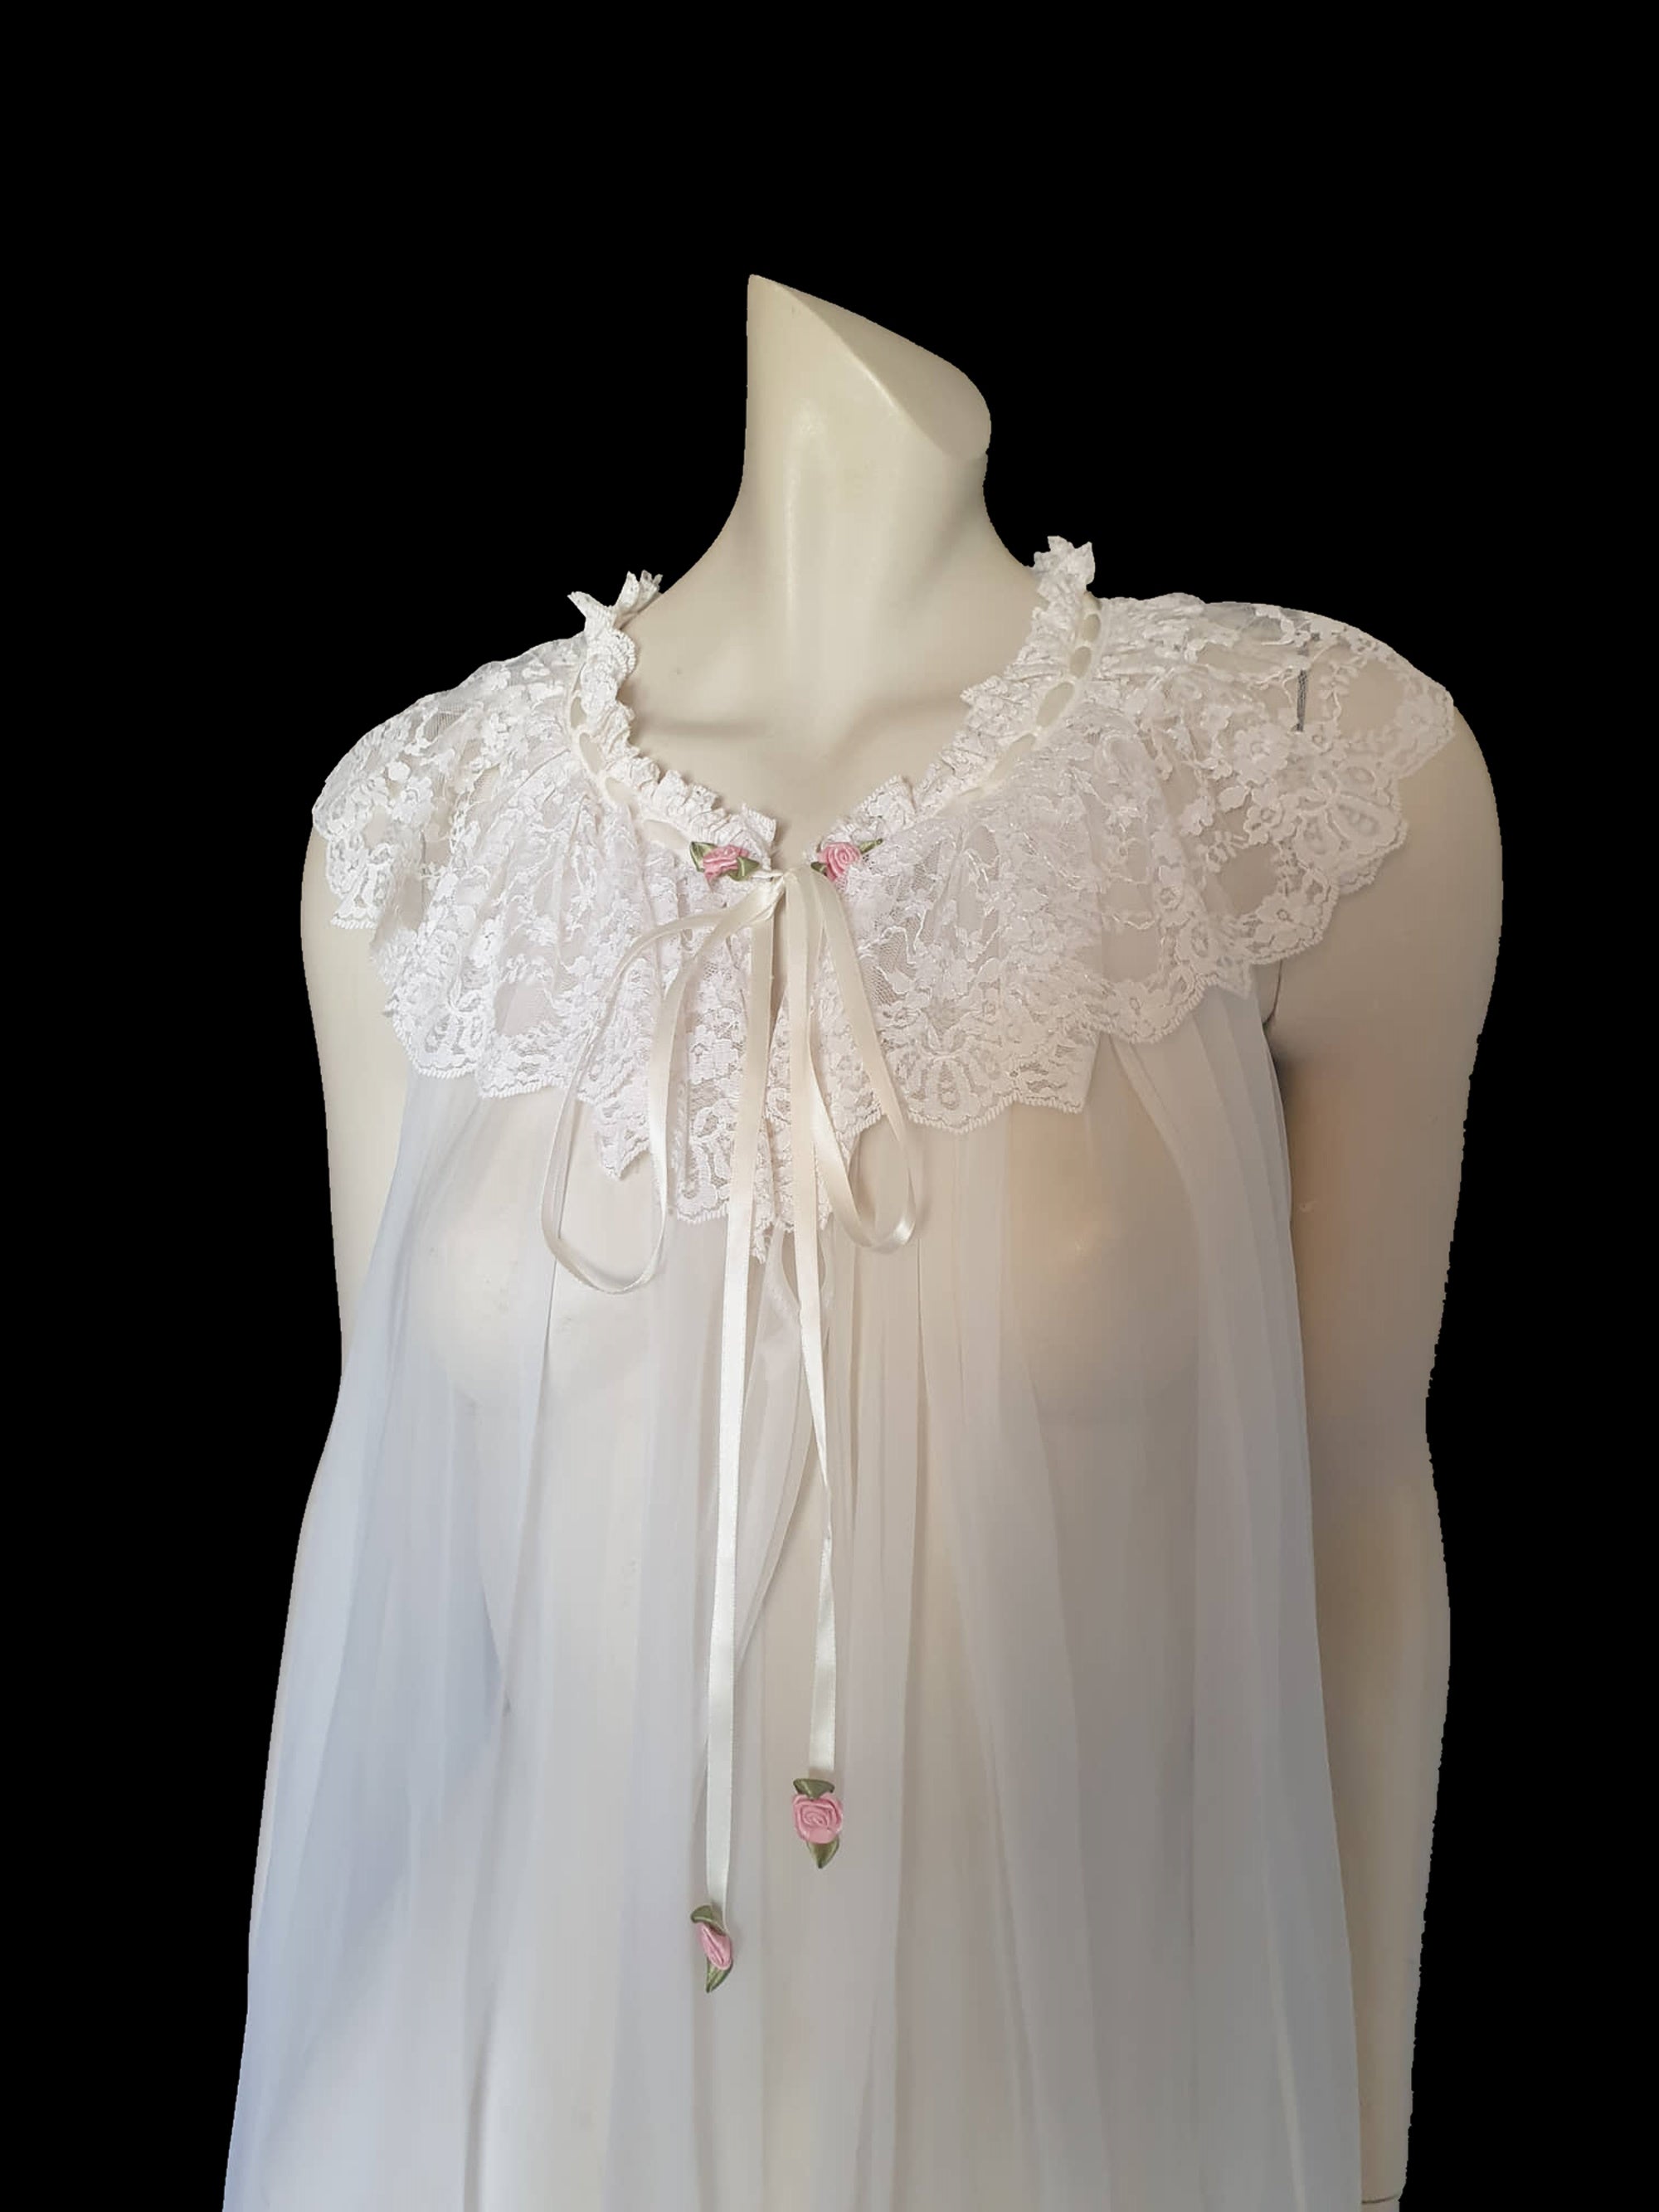 vintage sheer white negligee nightgown with lace ruffles and pink ribbon rosettes